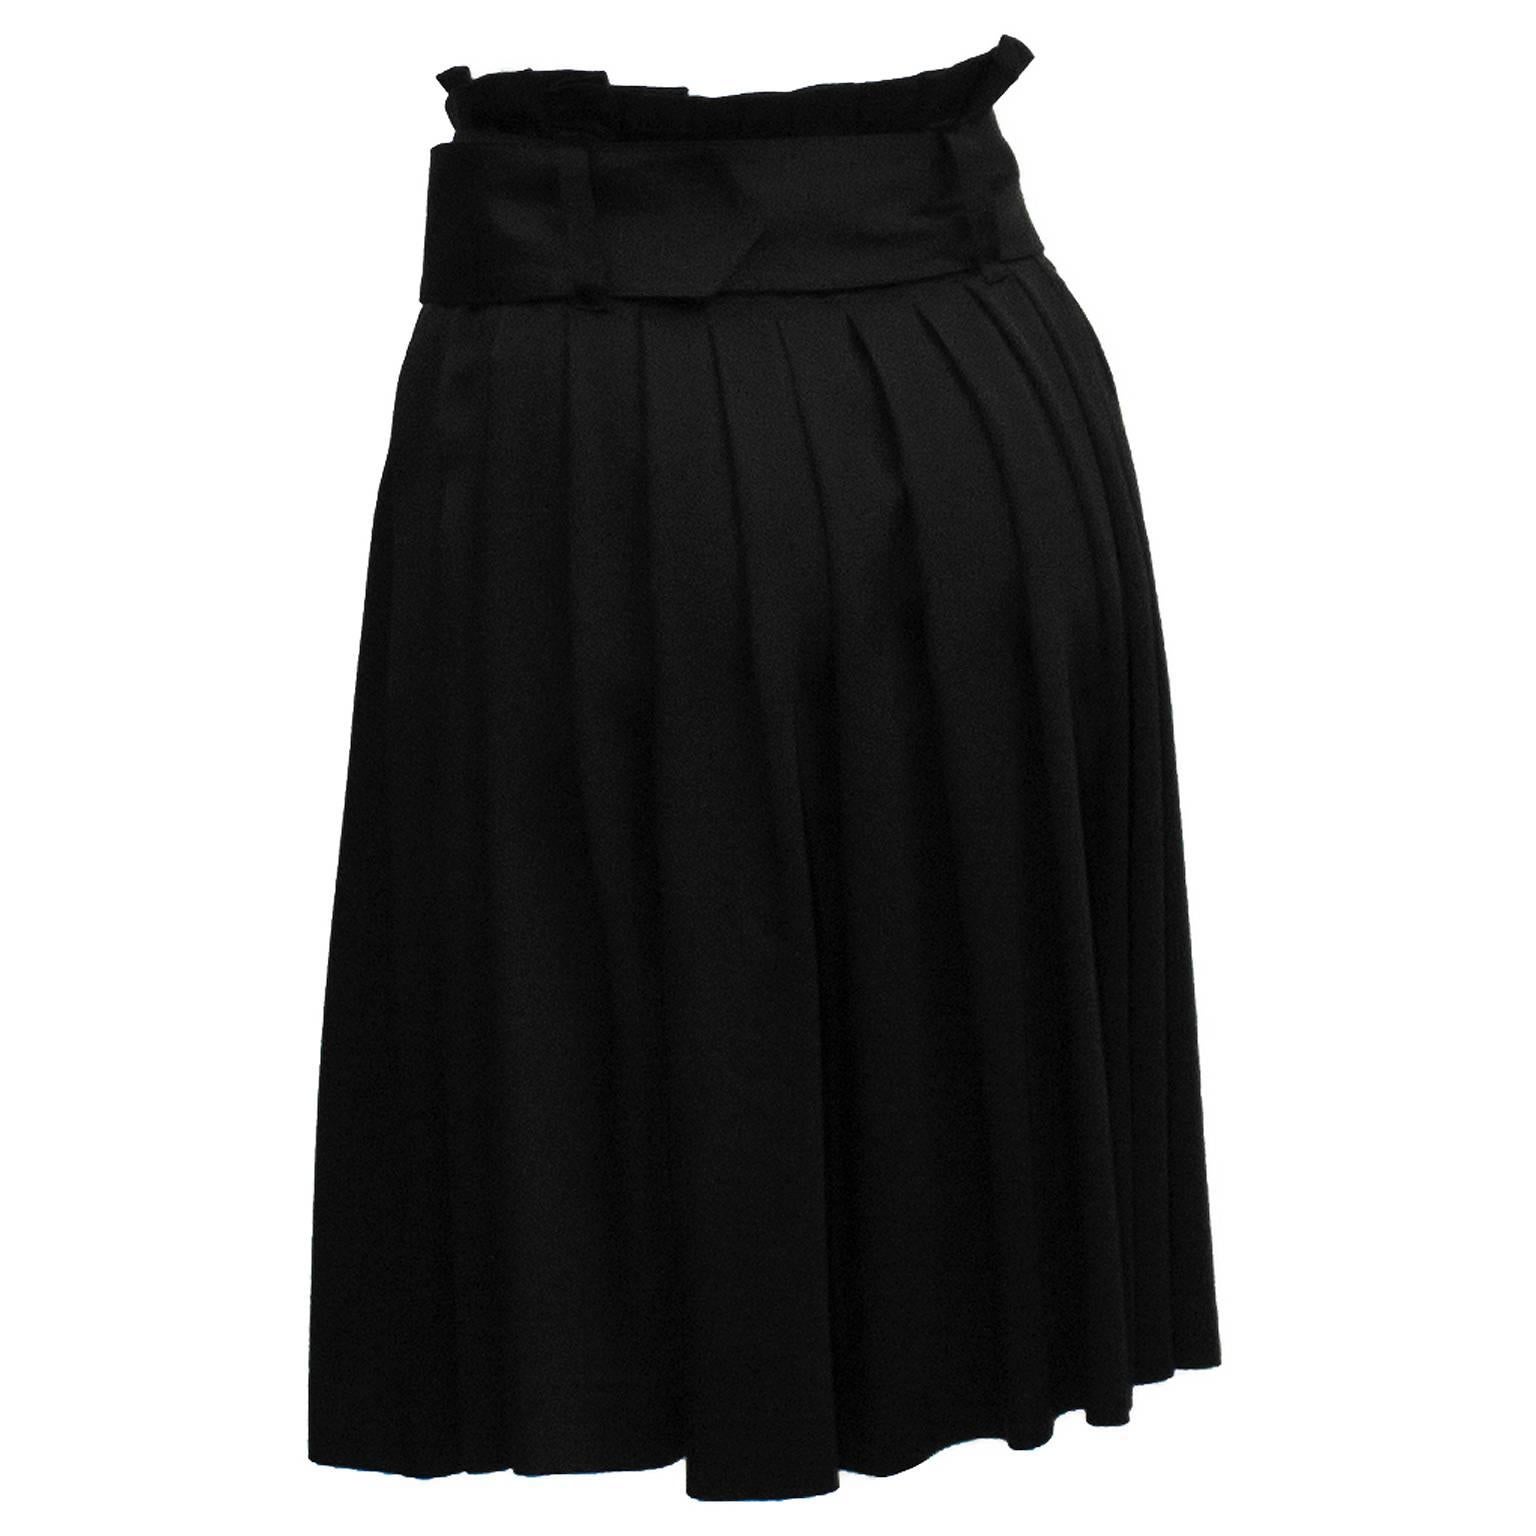 Alexander Mcqueen black pleated paperbag style sateen skirt from the 2000's. Skirt features a wide belt of the same sateen blend fabric. Double-d ring belt has gold tone hardware. Side zip and hook closure. Excellent condition.  Fits like a US size